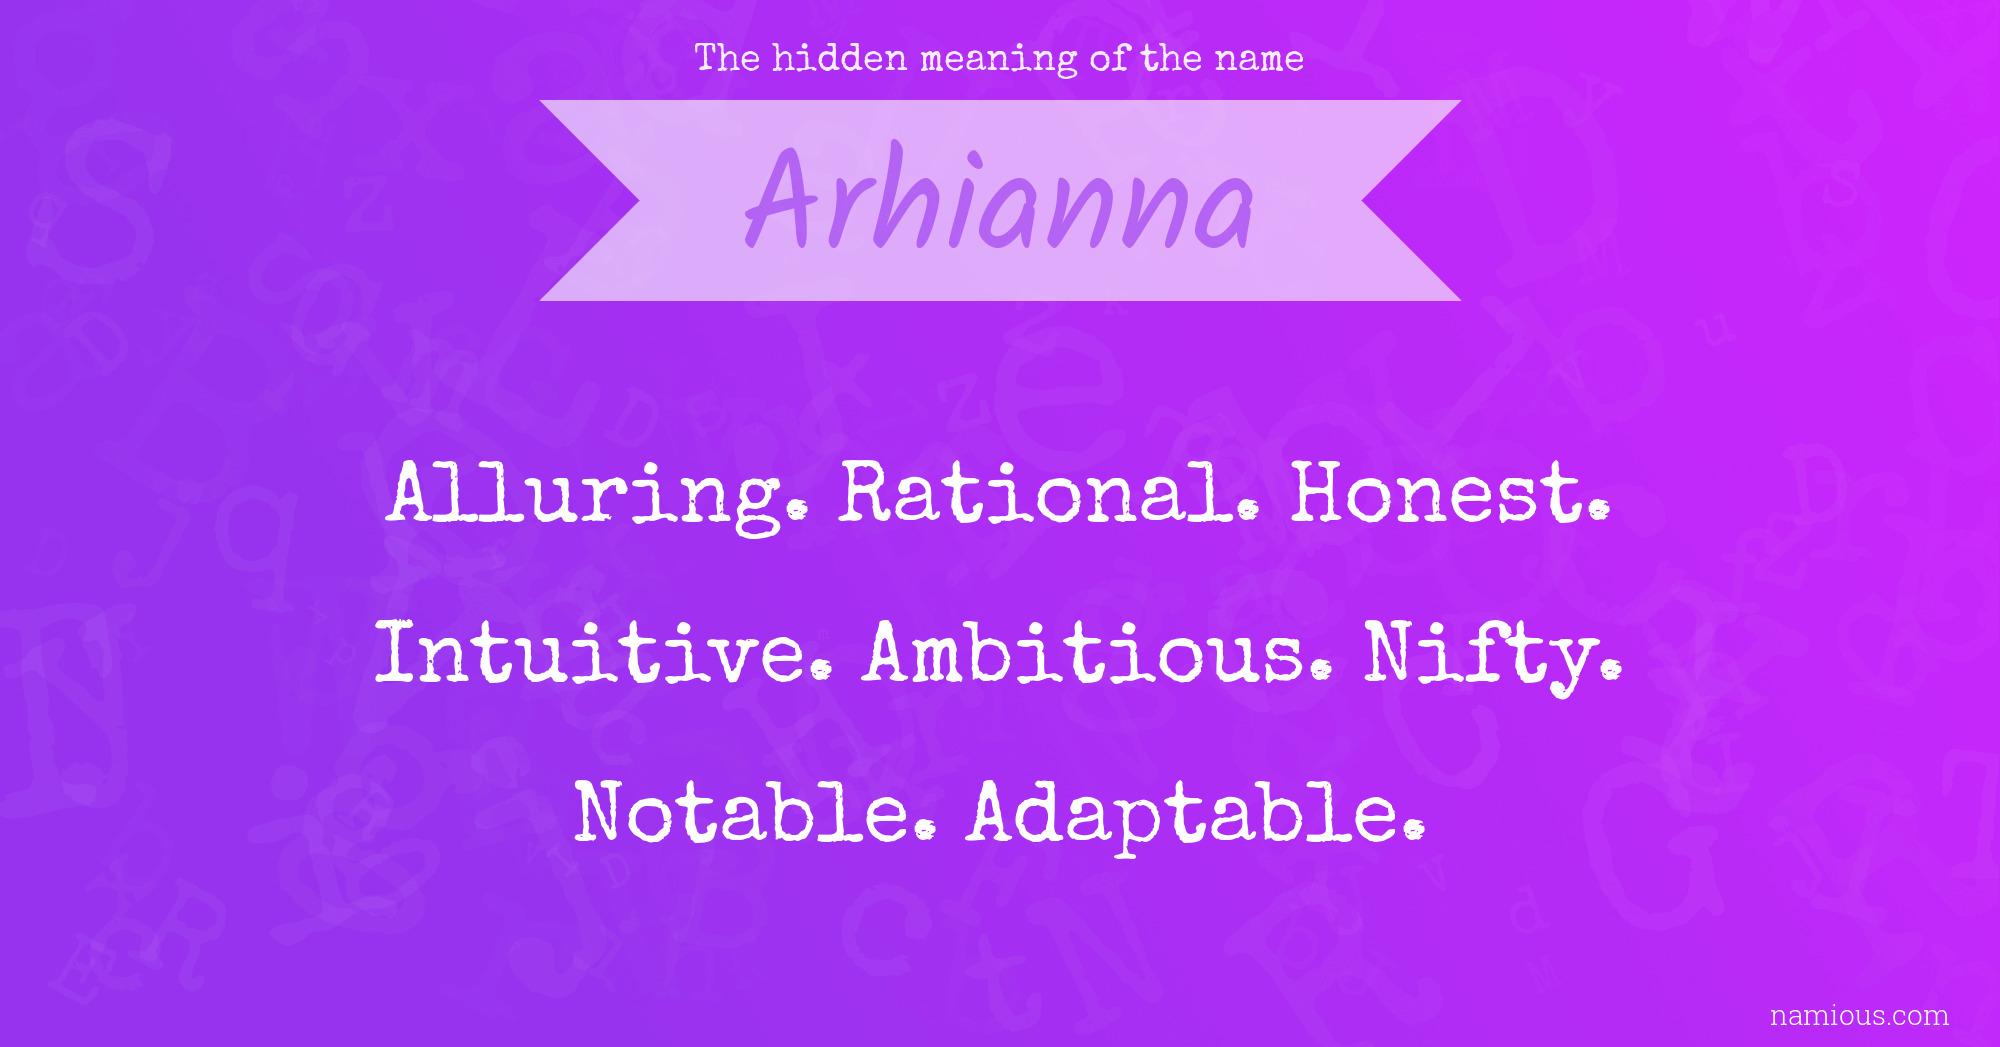 The hidden meaning of the name Arhianna